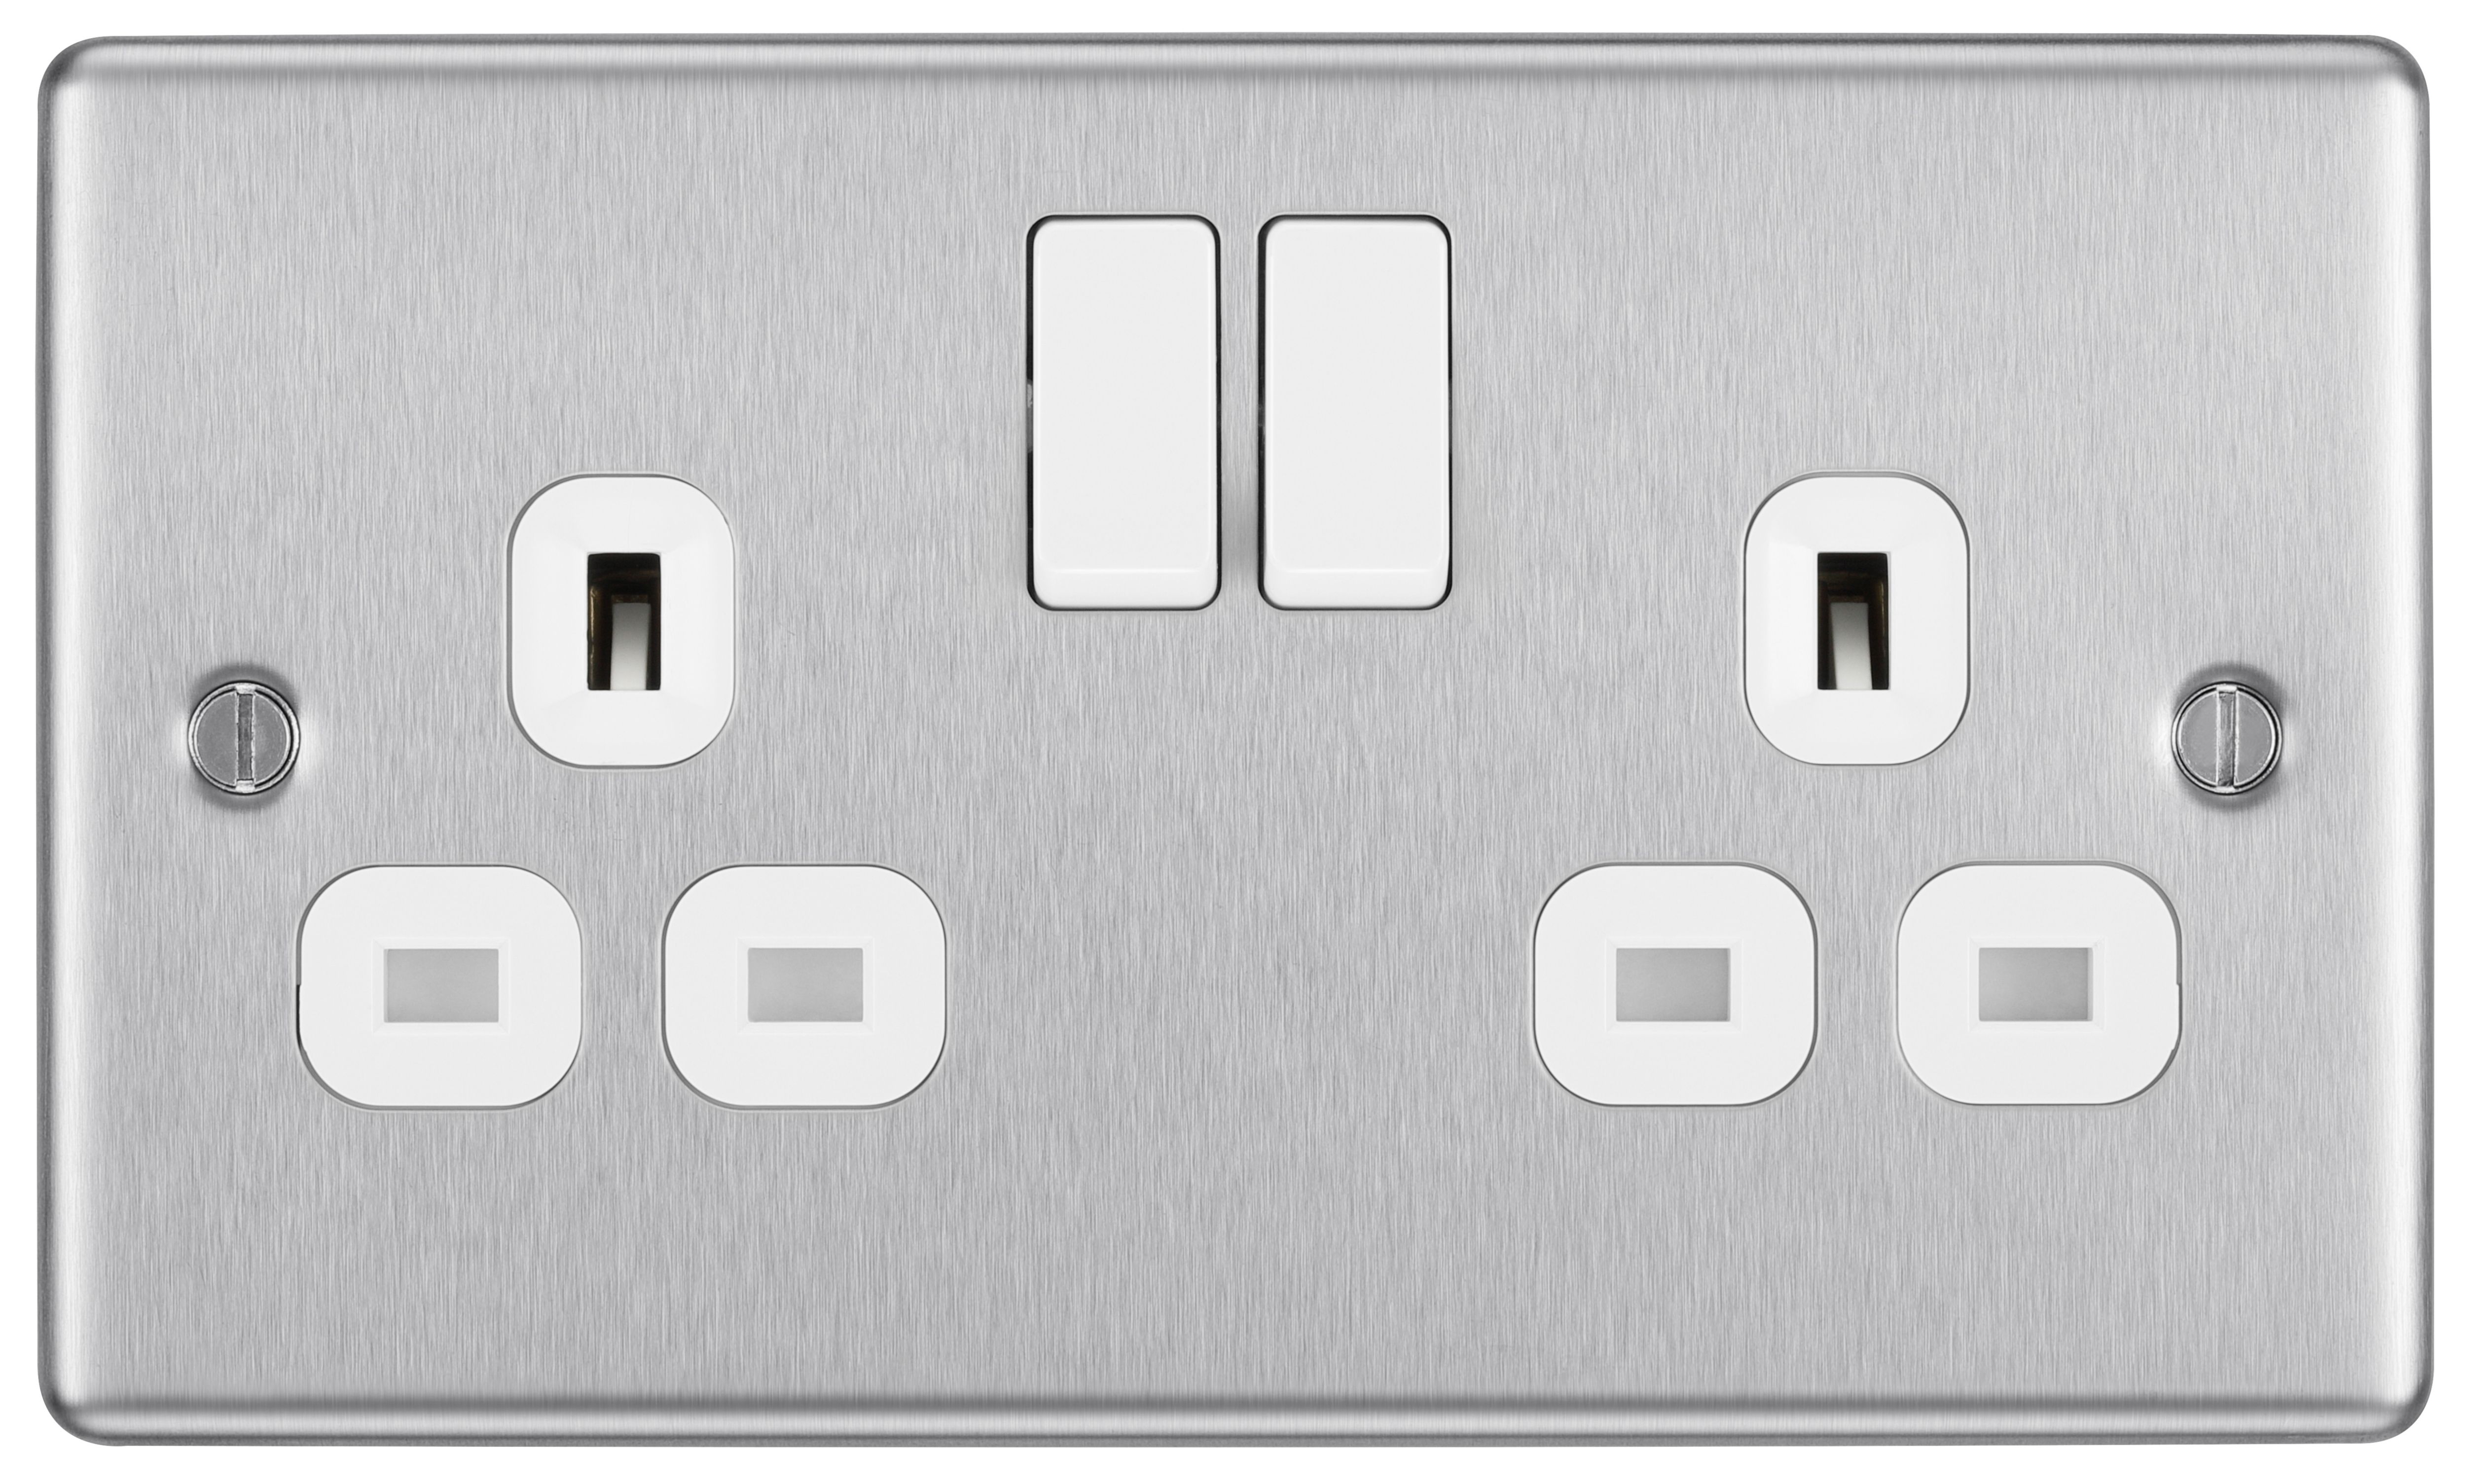 GoodHome Brushed Steel Double 13A Switched socket & White inserts, Pack of 5